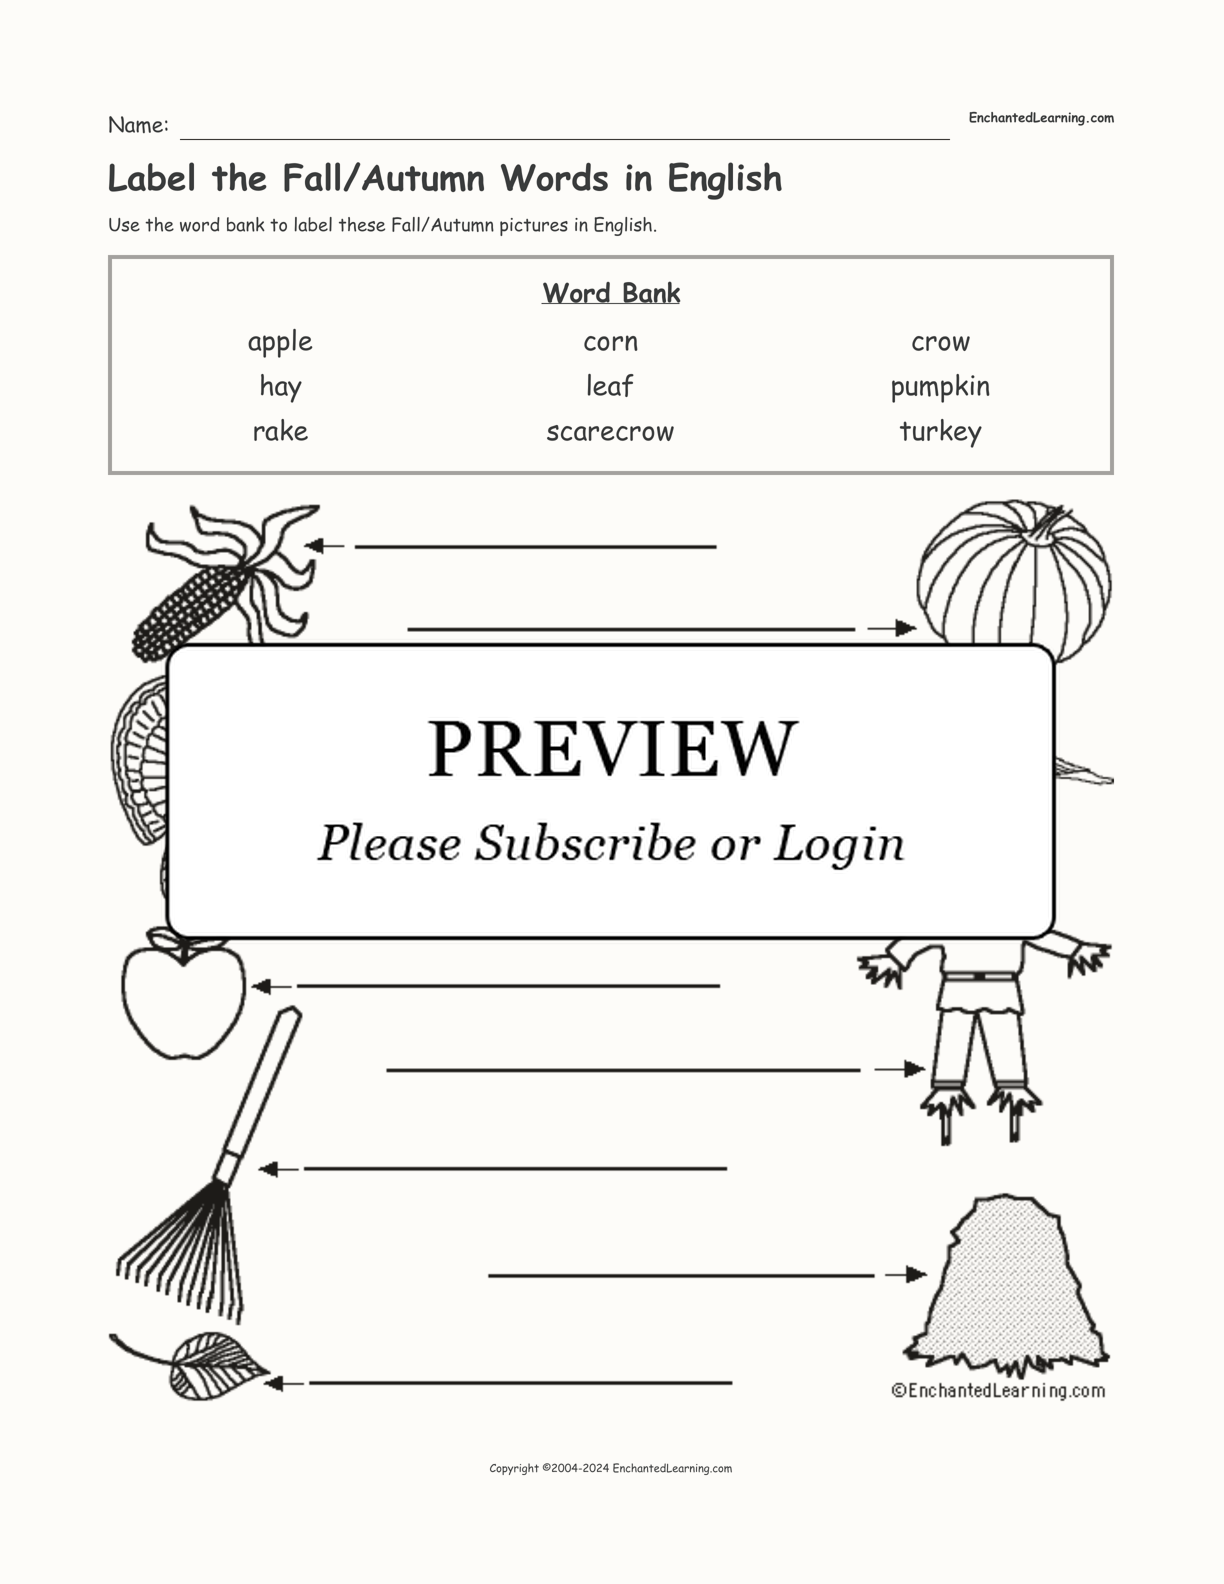 Label the Fall/Autumn Words in English interactive worksheet page 1